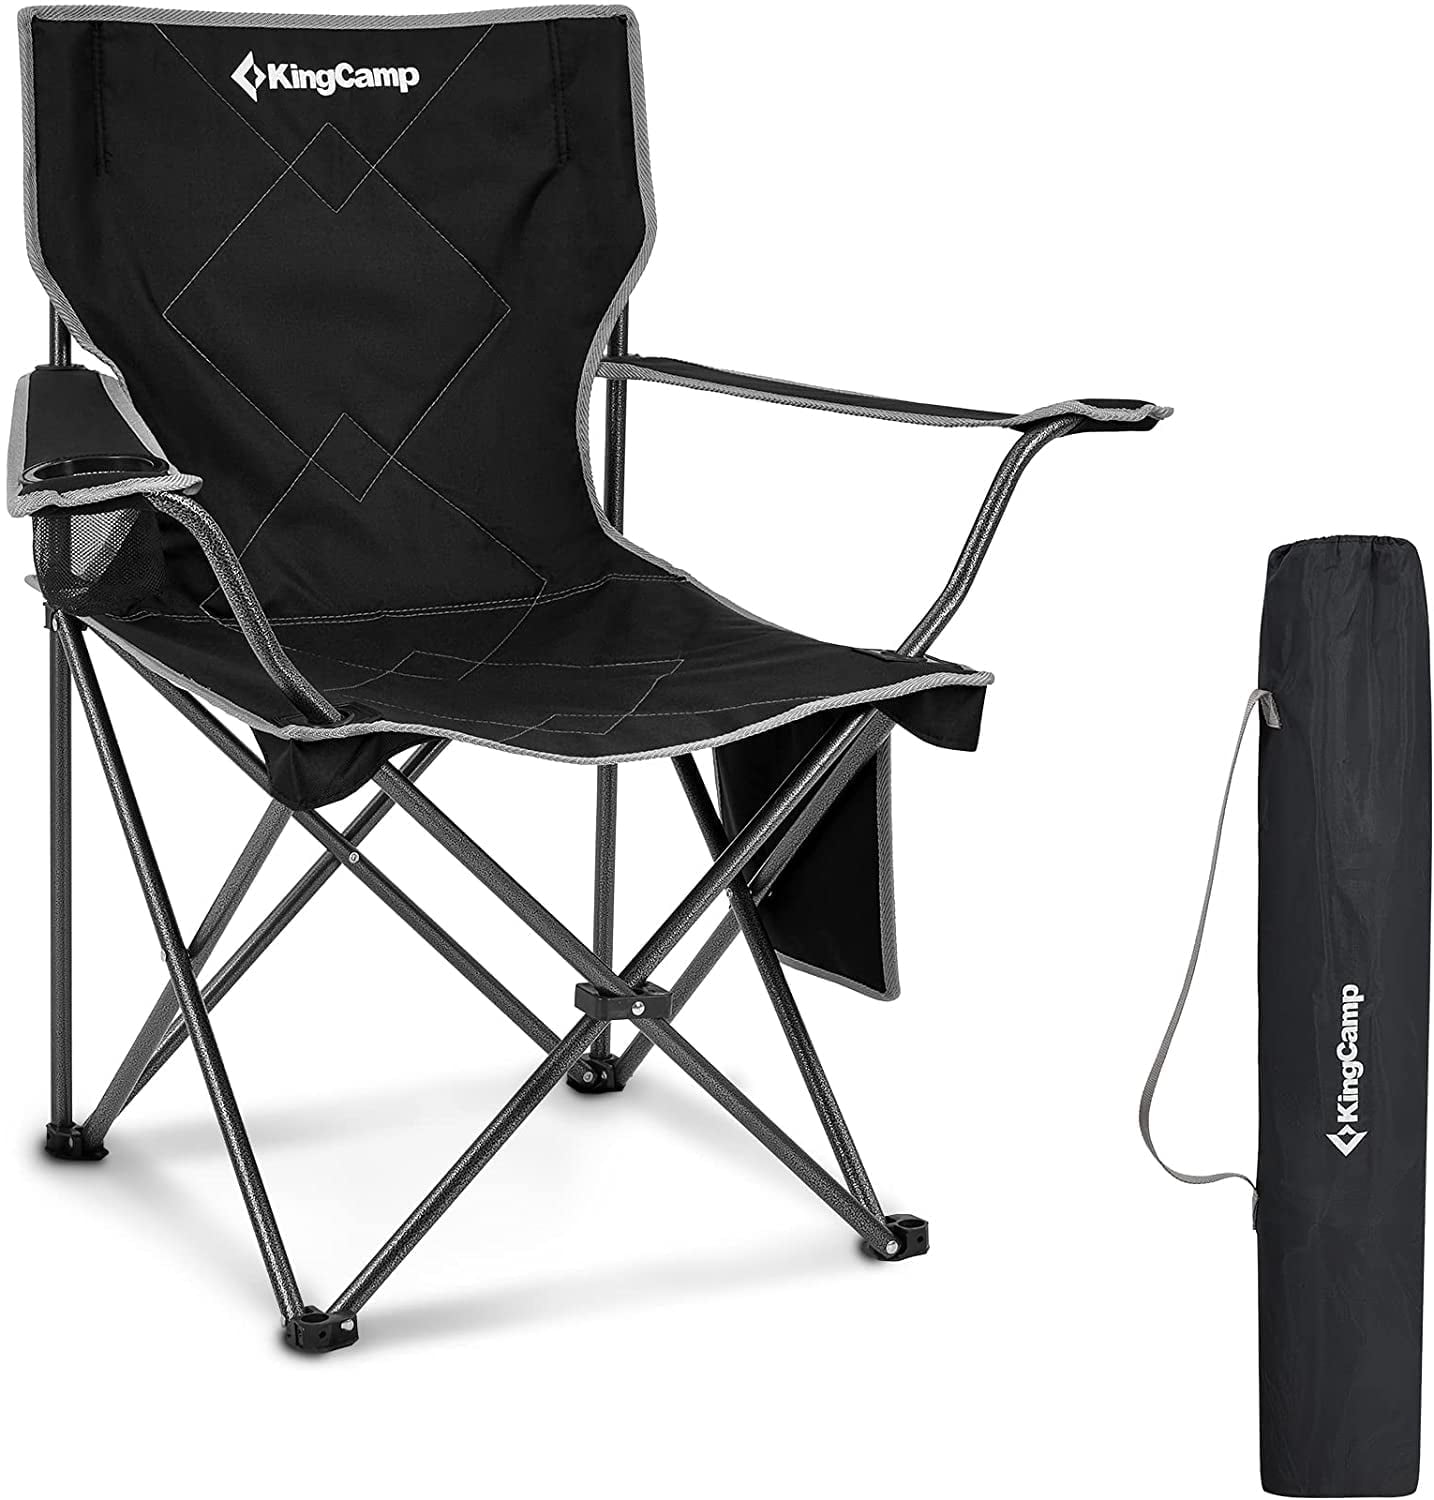 Portable Folding Camping Chairs, Heavy Duty Lawn Chair Support 300 lbs, Outdoor Chair for Hiking, Beach, Fishing, adult Unisex, Black